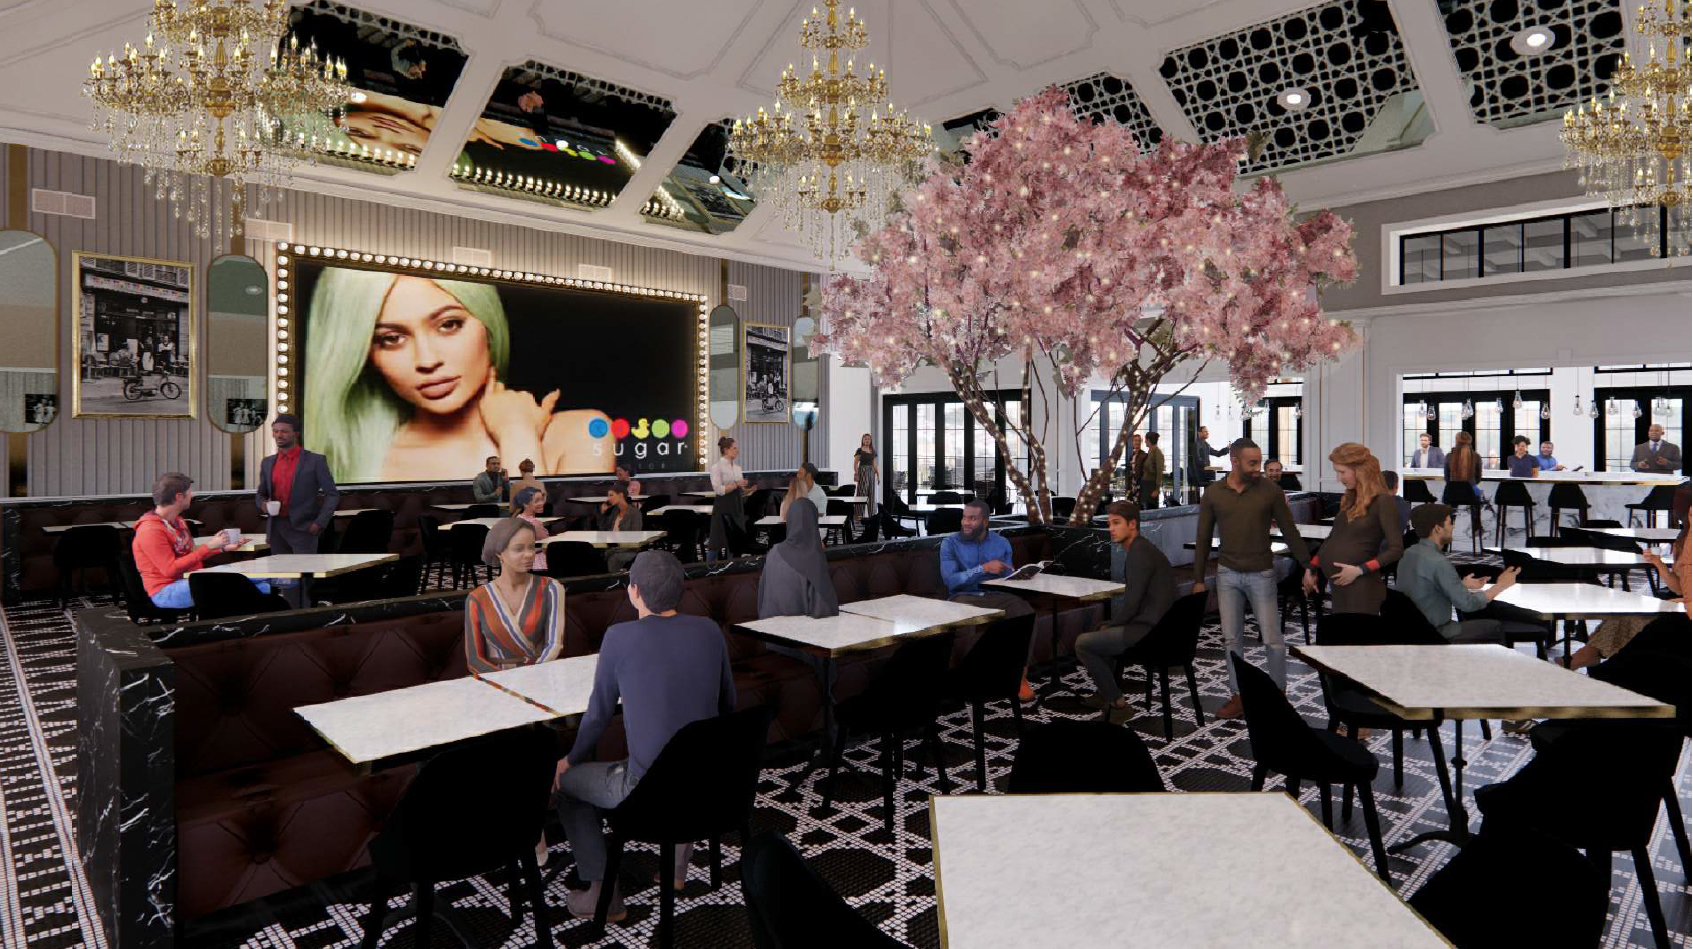 Sugar Factory said it will have 179 seats in the main dining area.